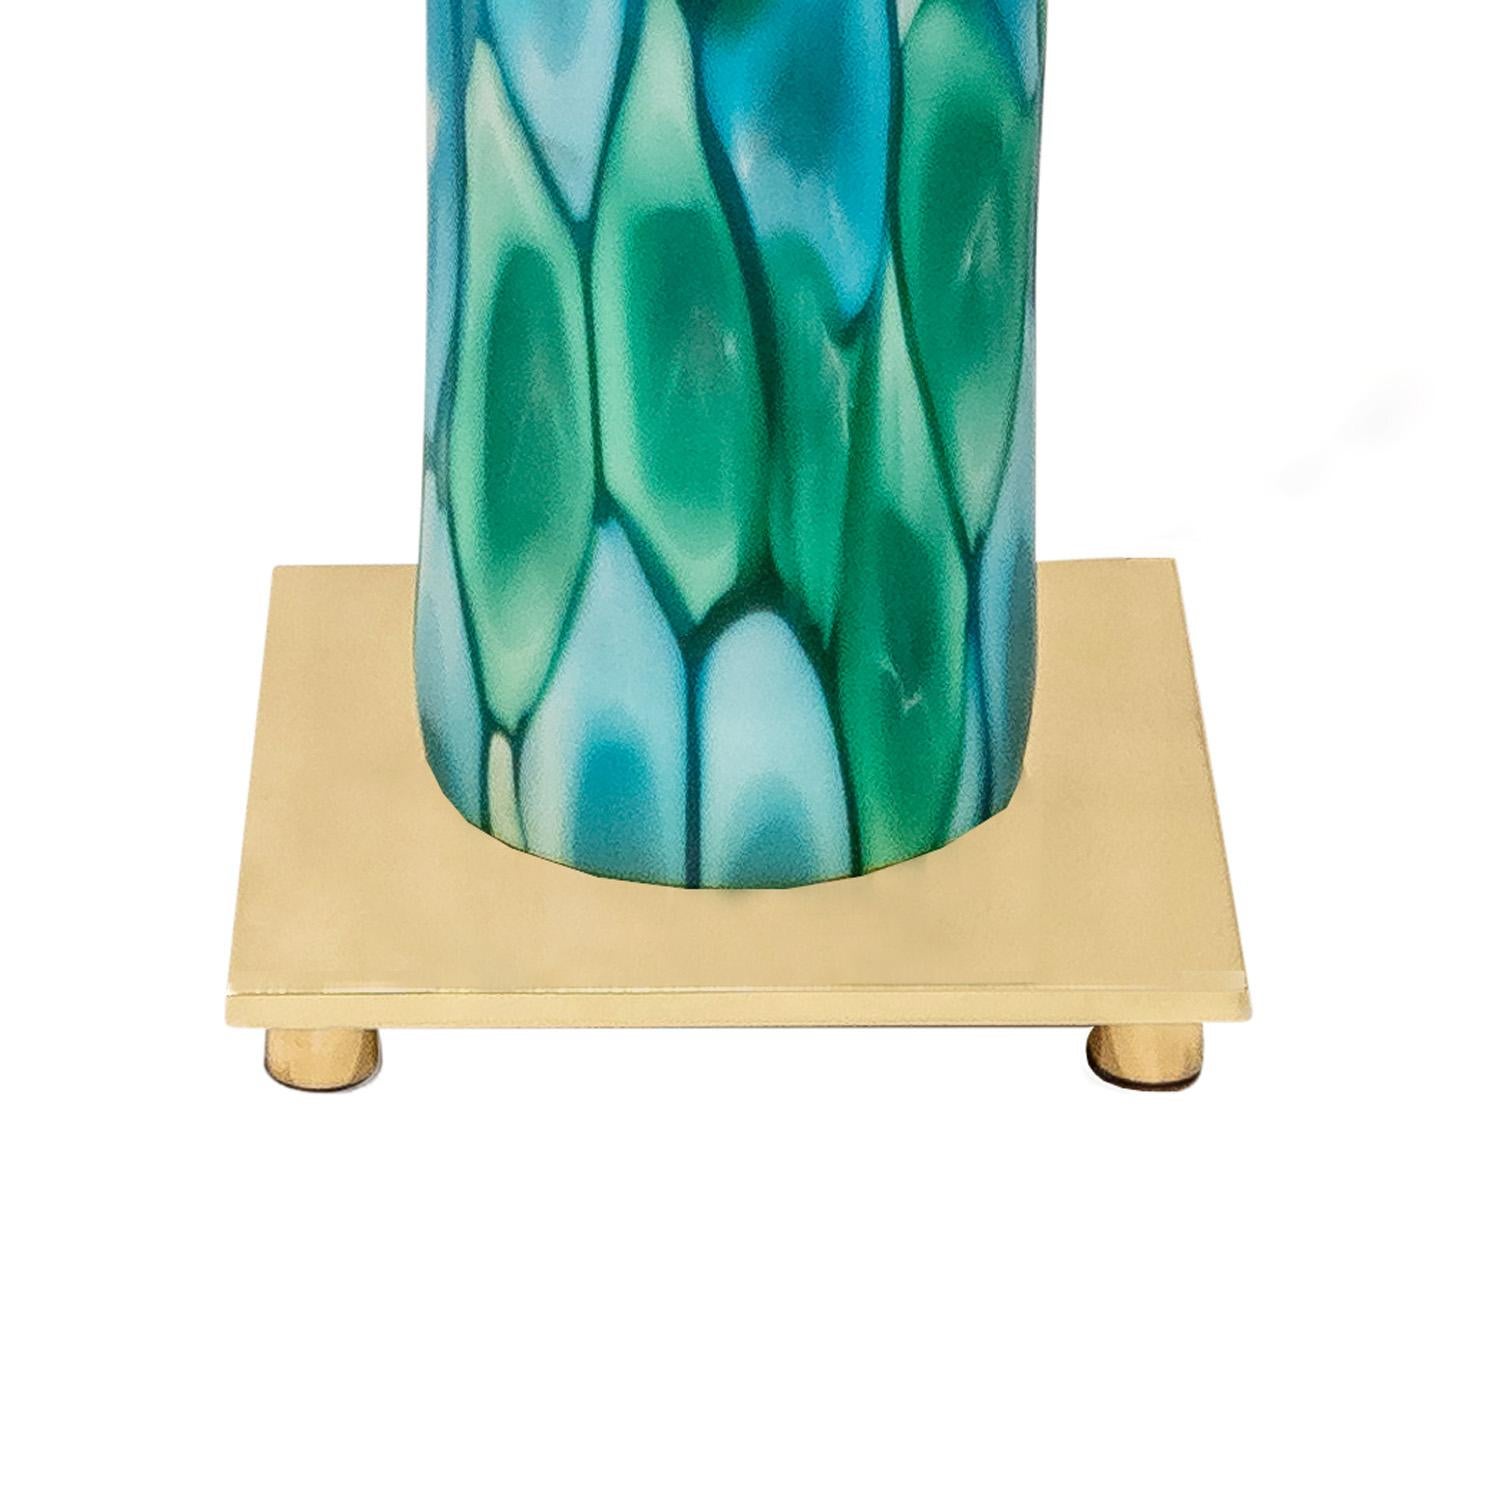 Mid-Century Modern Fratelli Toso Art Glass Table Lamp with Green and Blue Murrhines, 1959 For Sale